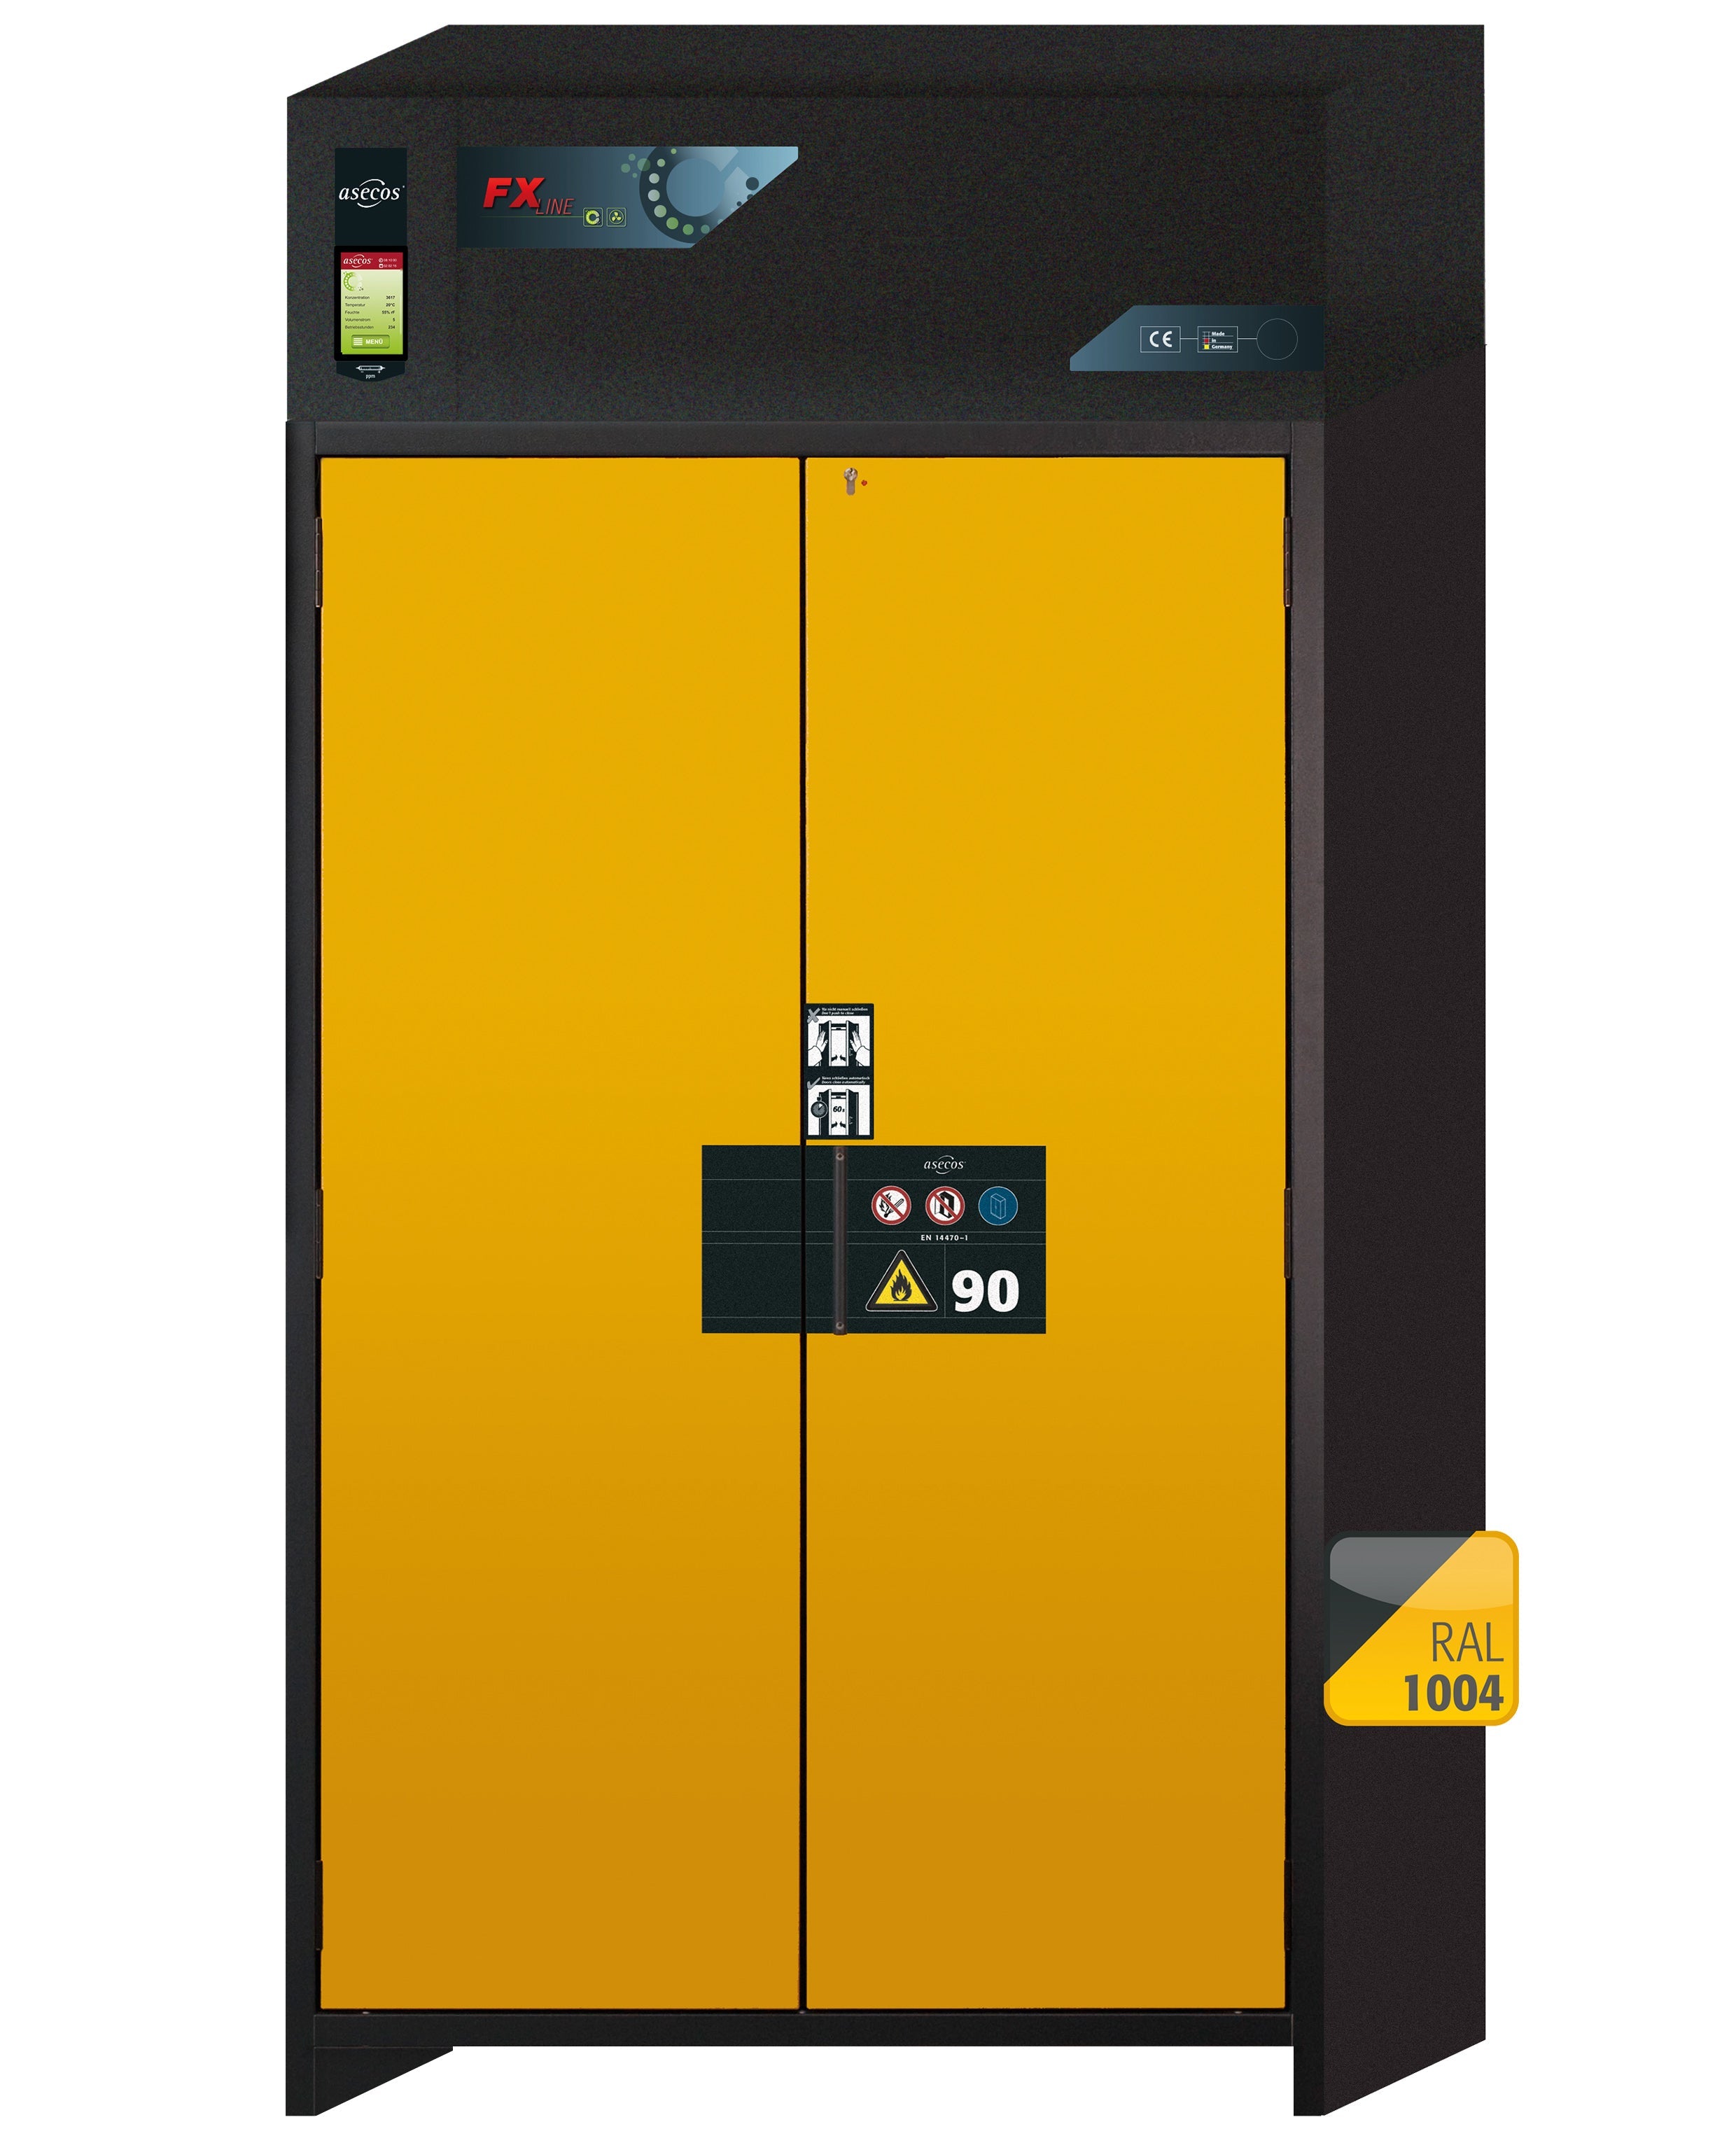 Type 90 recirculating air filter cabinet FX-PEGASUS-90 model FX90.229.120.WDAC in safety yellow RAL 1004 with 2x standard pull-out tray (stainless steel 1.4301)